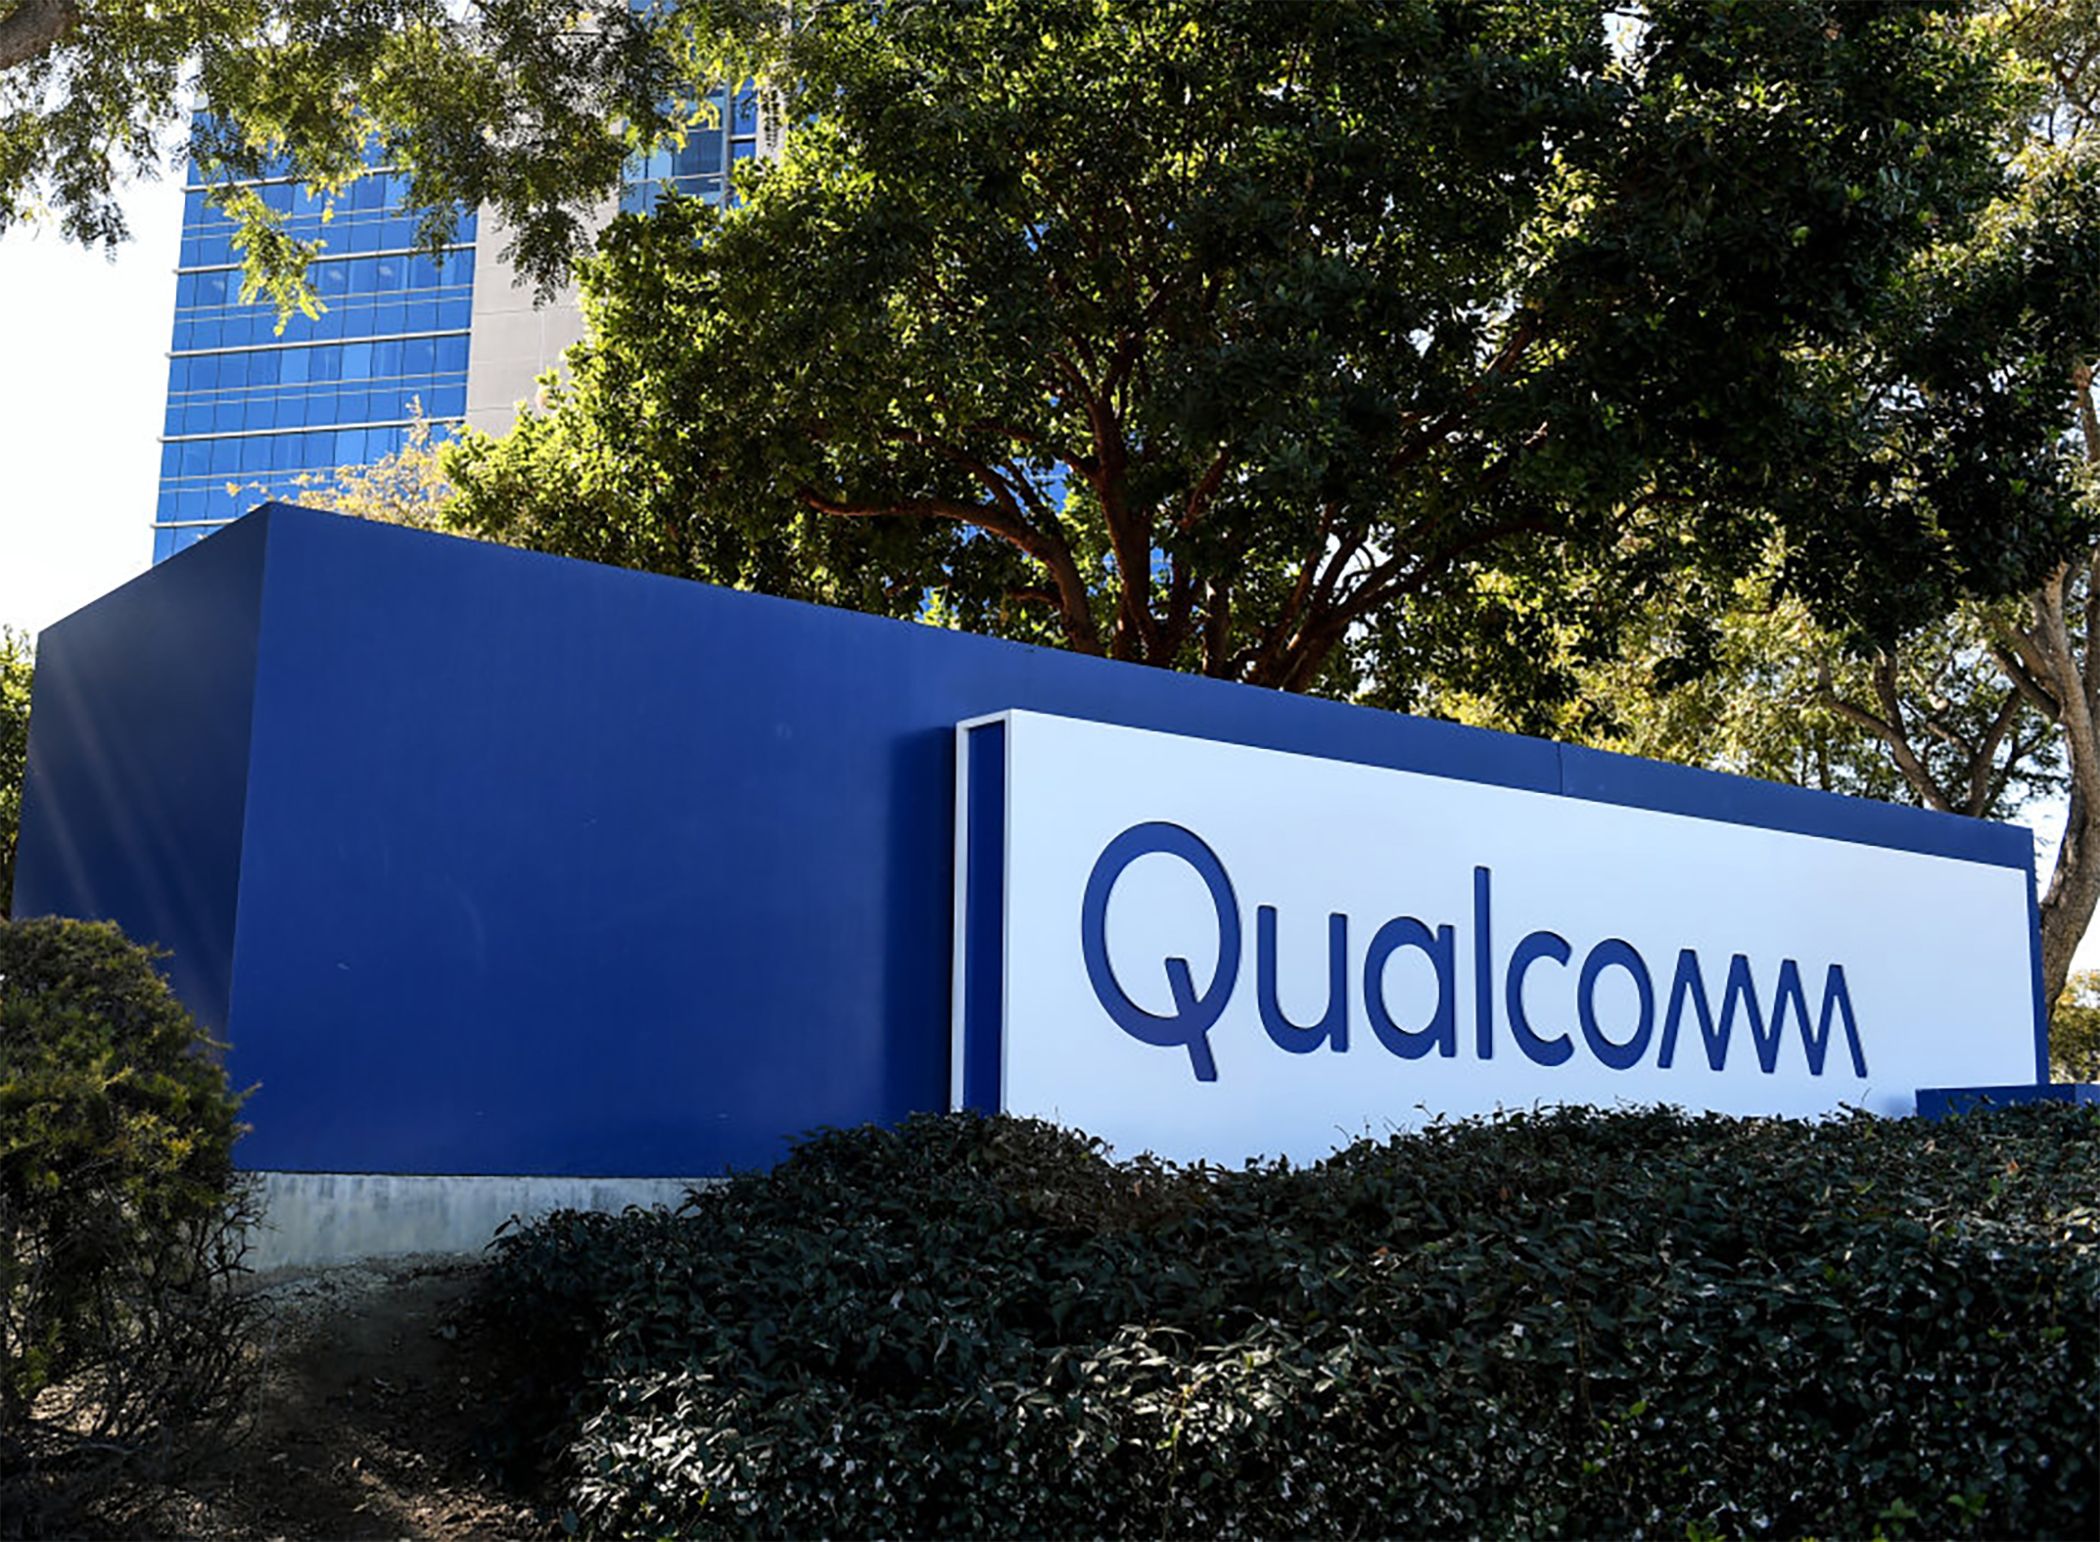 Qualcomm logo on sign surrounded by trees and plants.